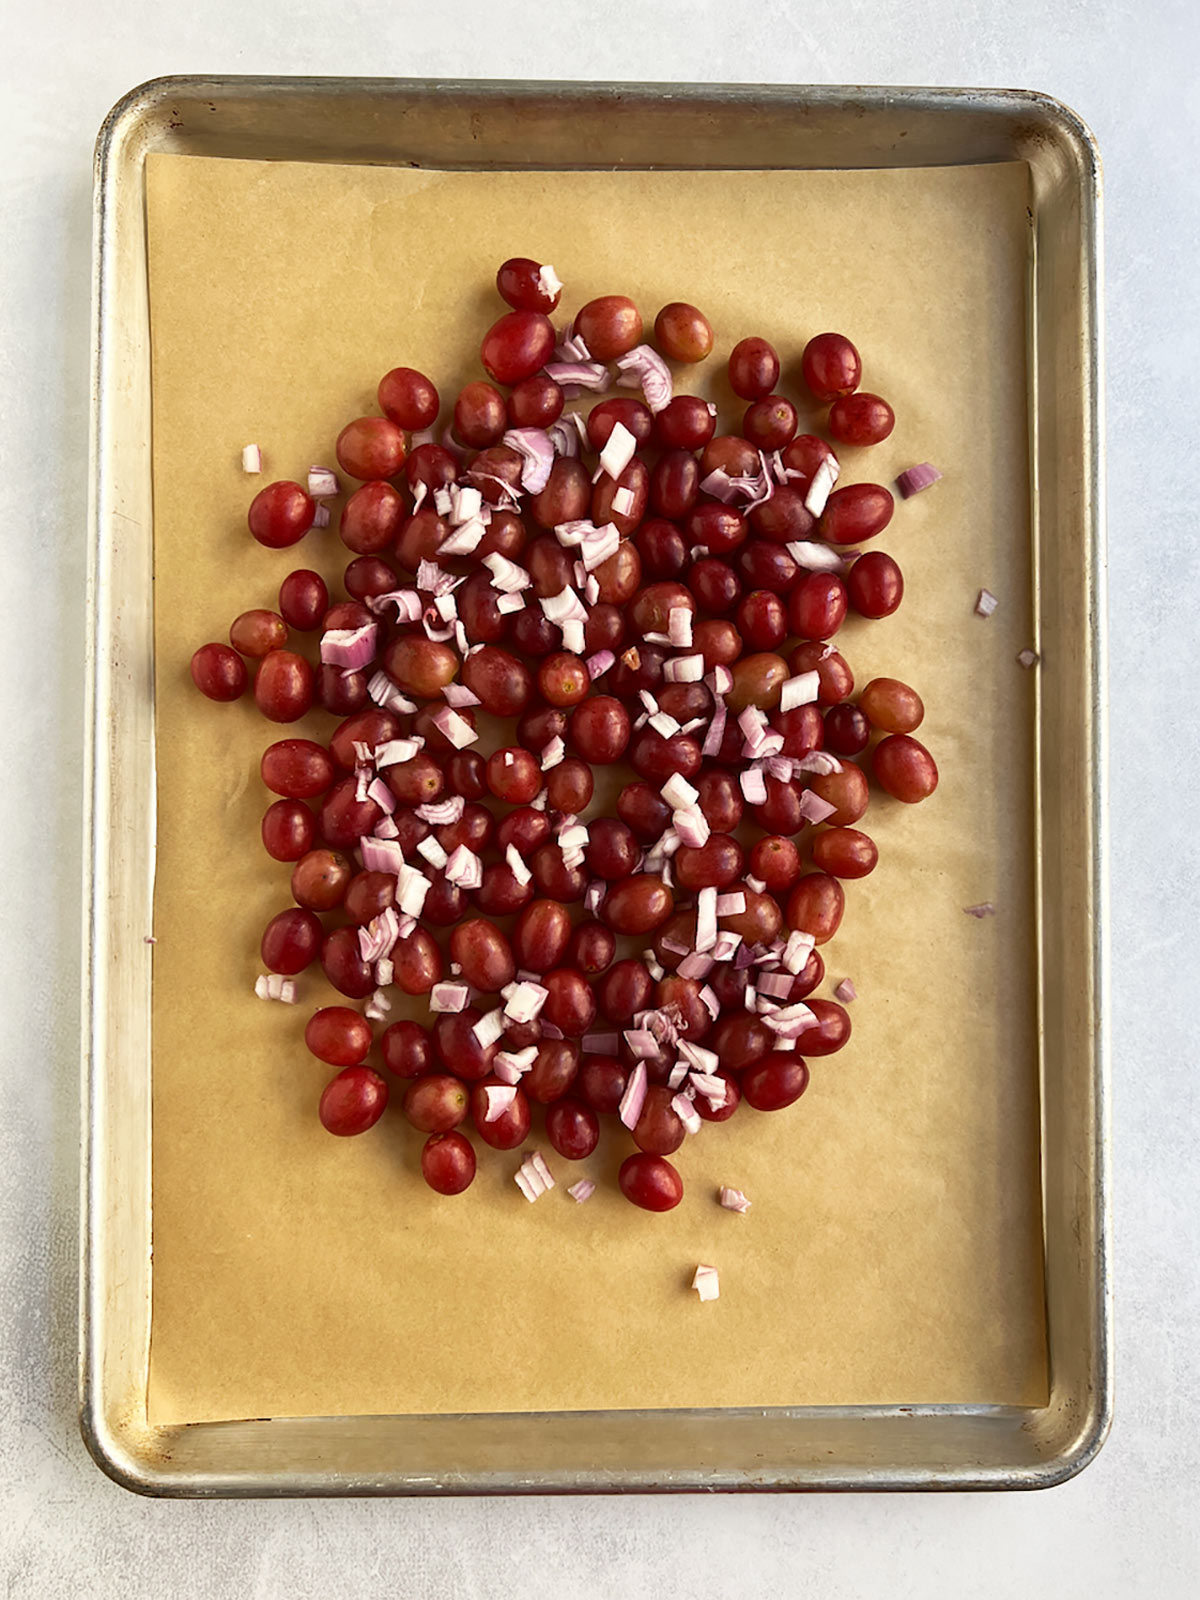 Uncooked grapes and shallots on a parchment-lined baking sheet.